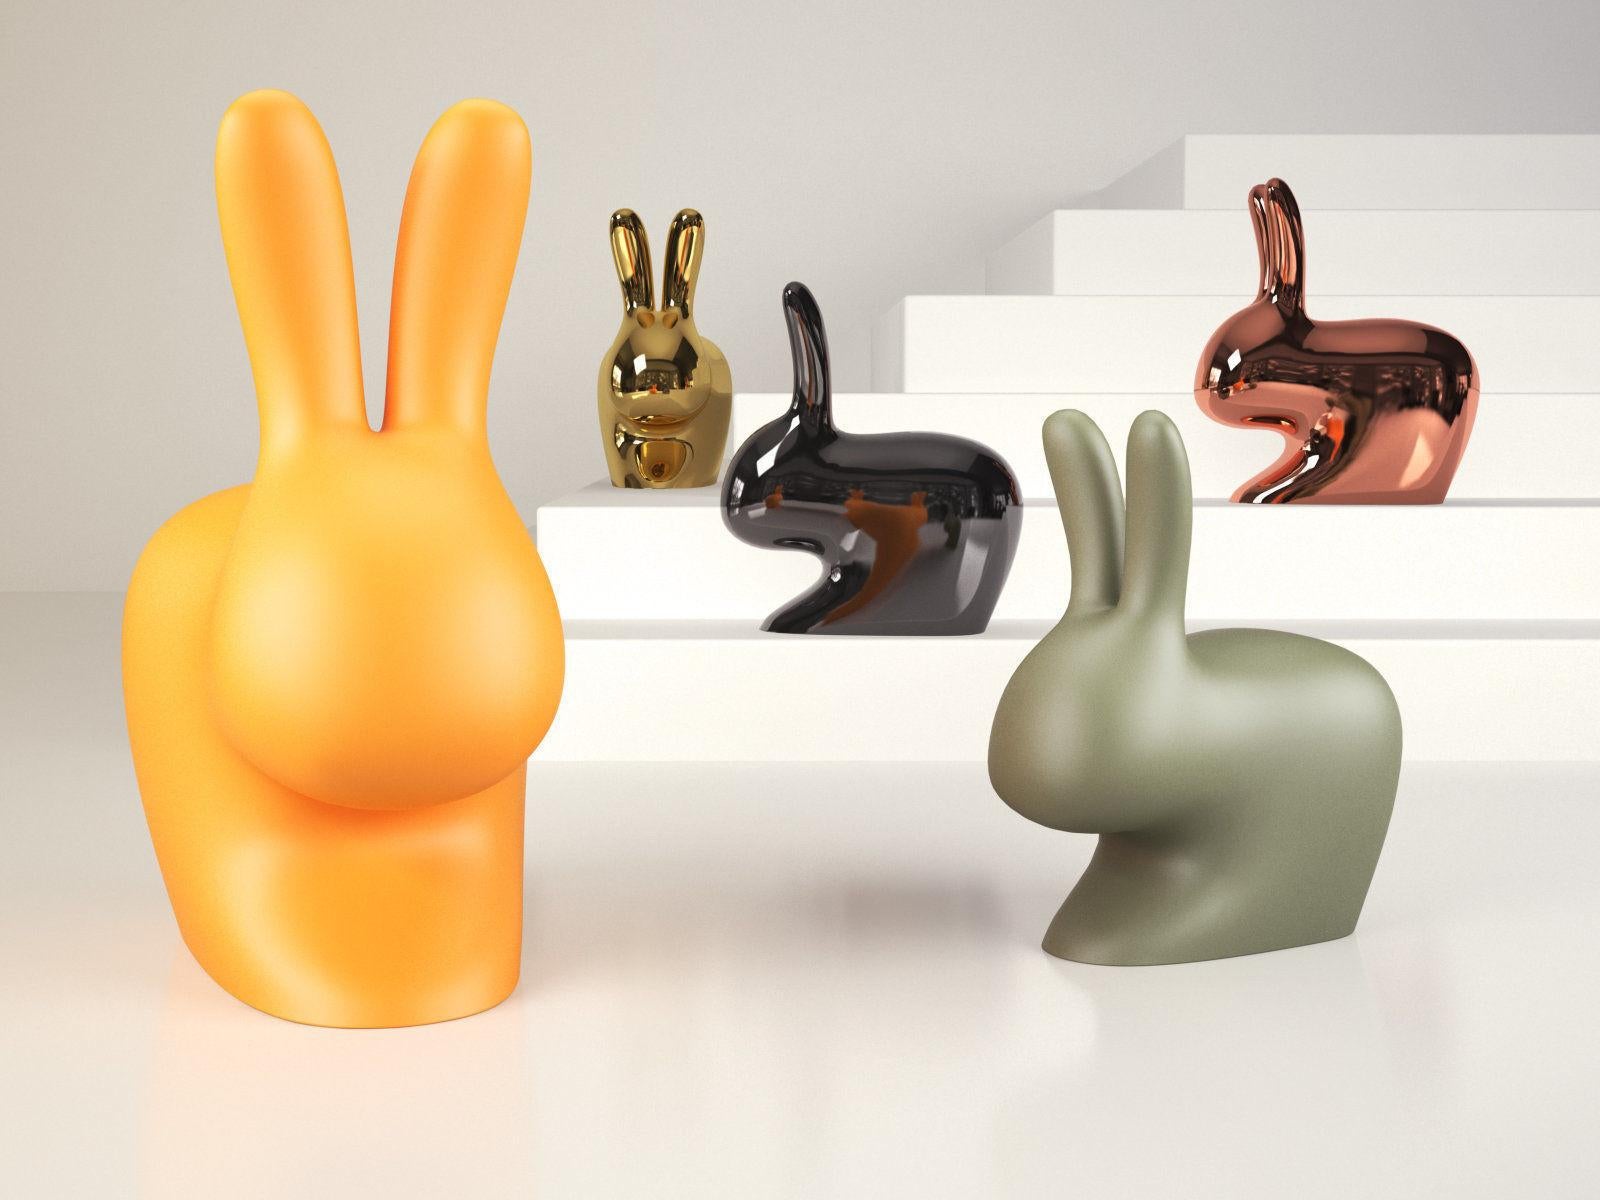 The idea of the rabbit, a gentle, lovable and shy animal, comes from the association of its silhouette with that of a seat, where the rabbit's ears become the backrest of the chair. It is conceived for children's fun: the rabbit chair can be used to